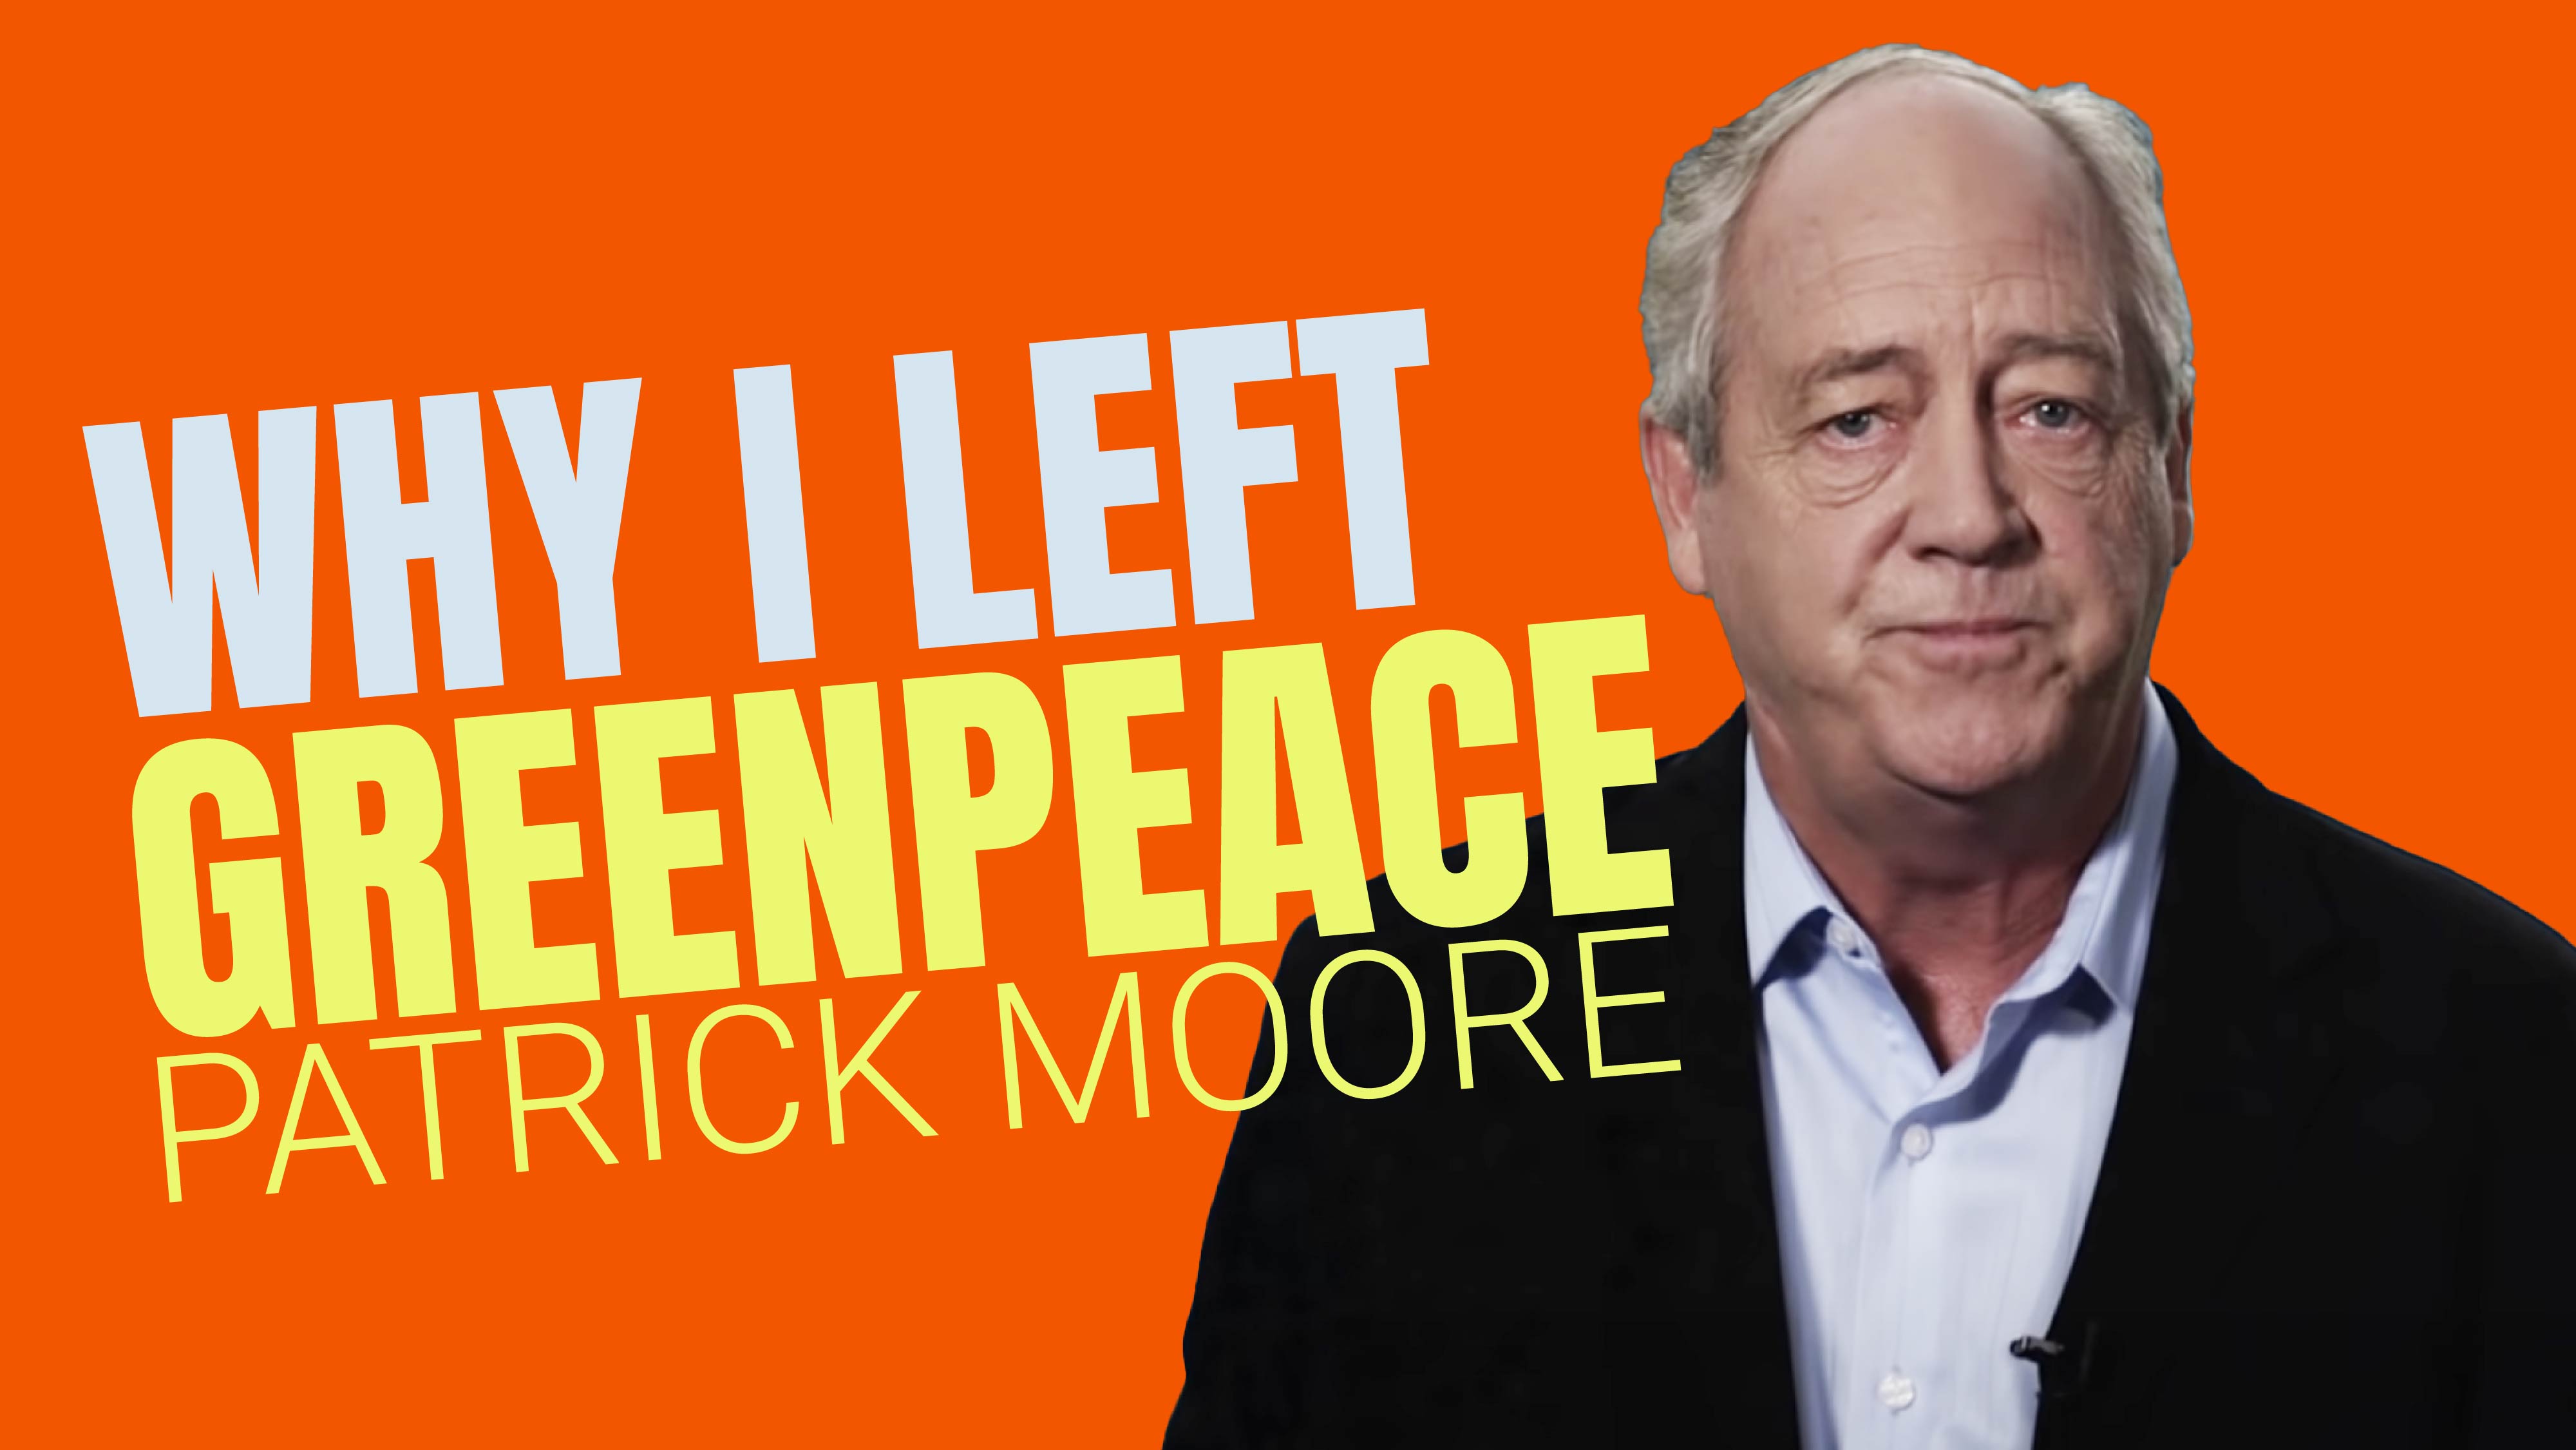 confessions of a greenpeace dropout by patrick moore